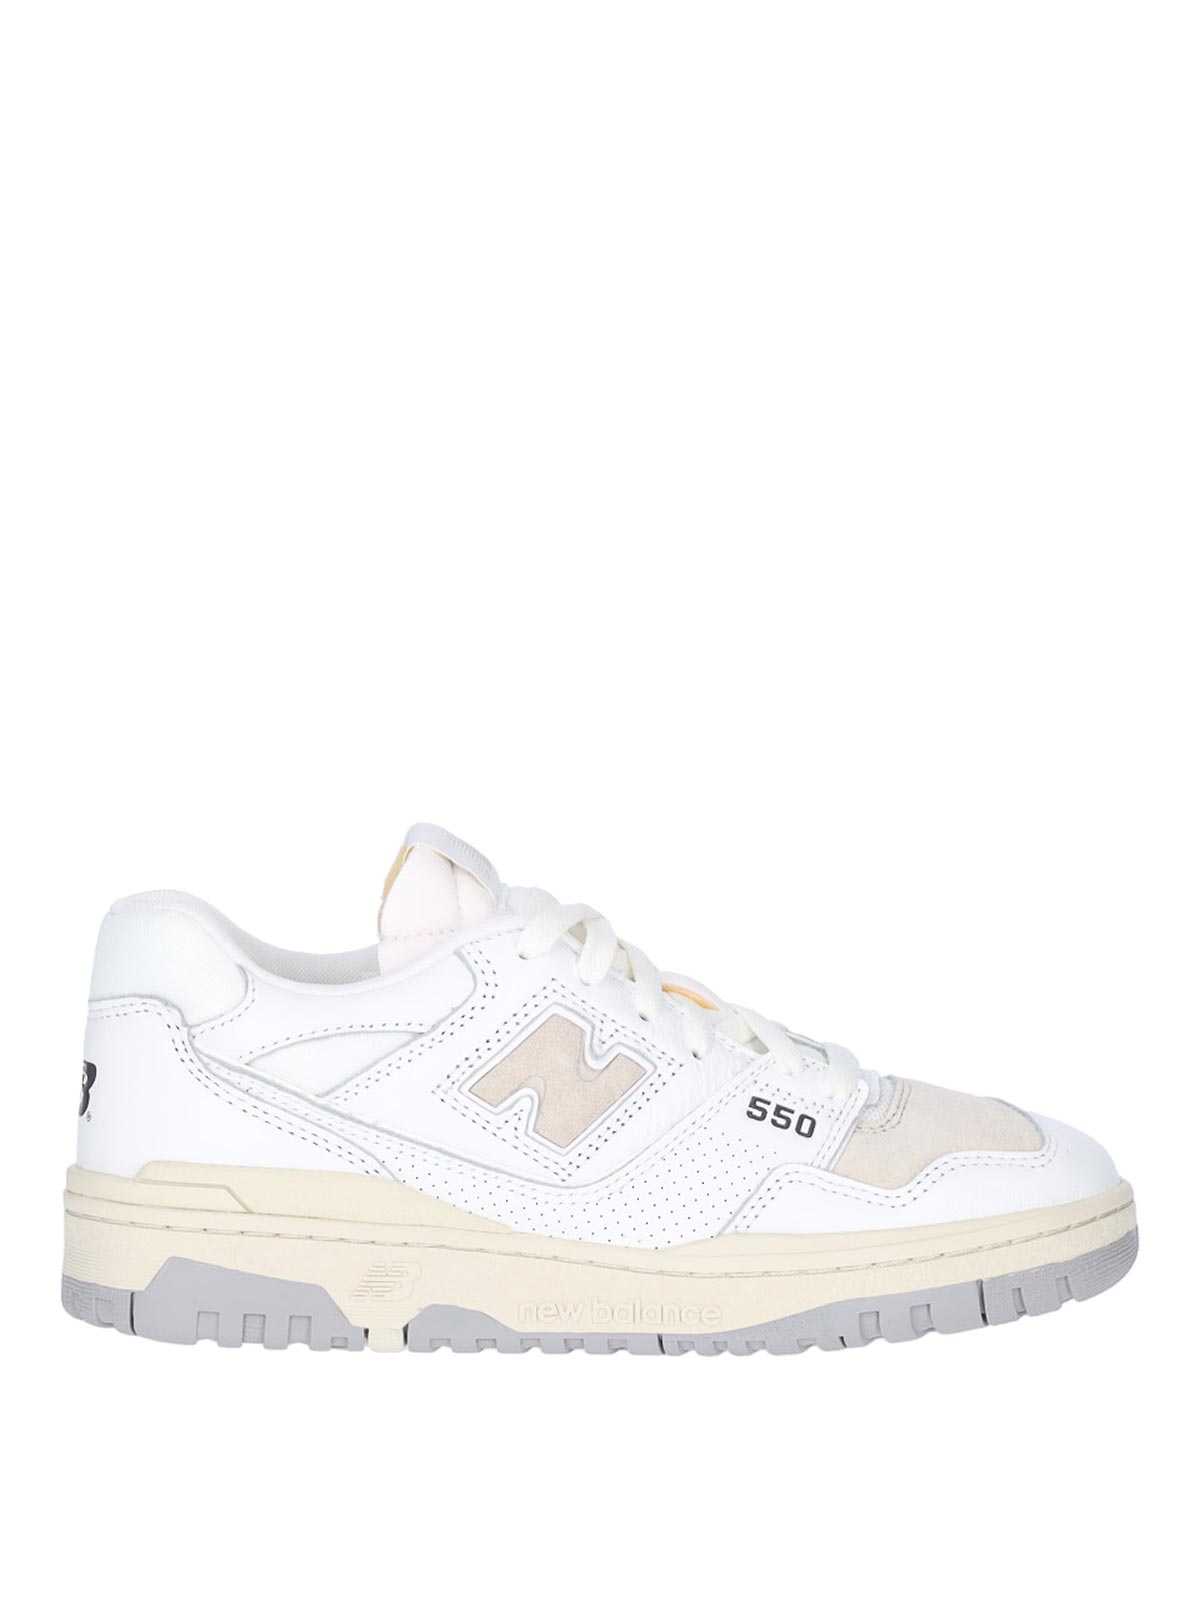 Trainers New Balance - Sneakers - BB550PWG | Shop online at THEBS